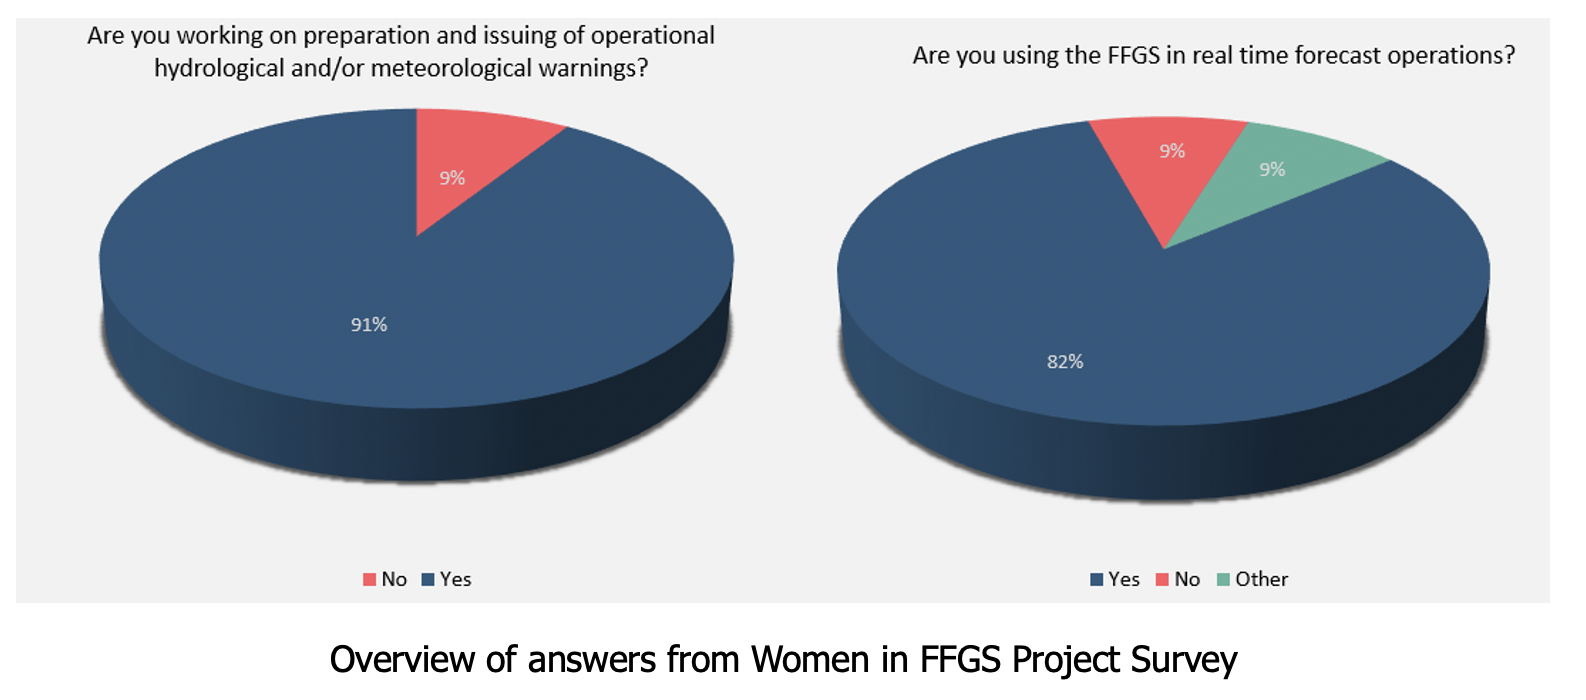 Overview of answers from Women in FFGS Project Survey